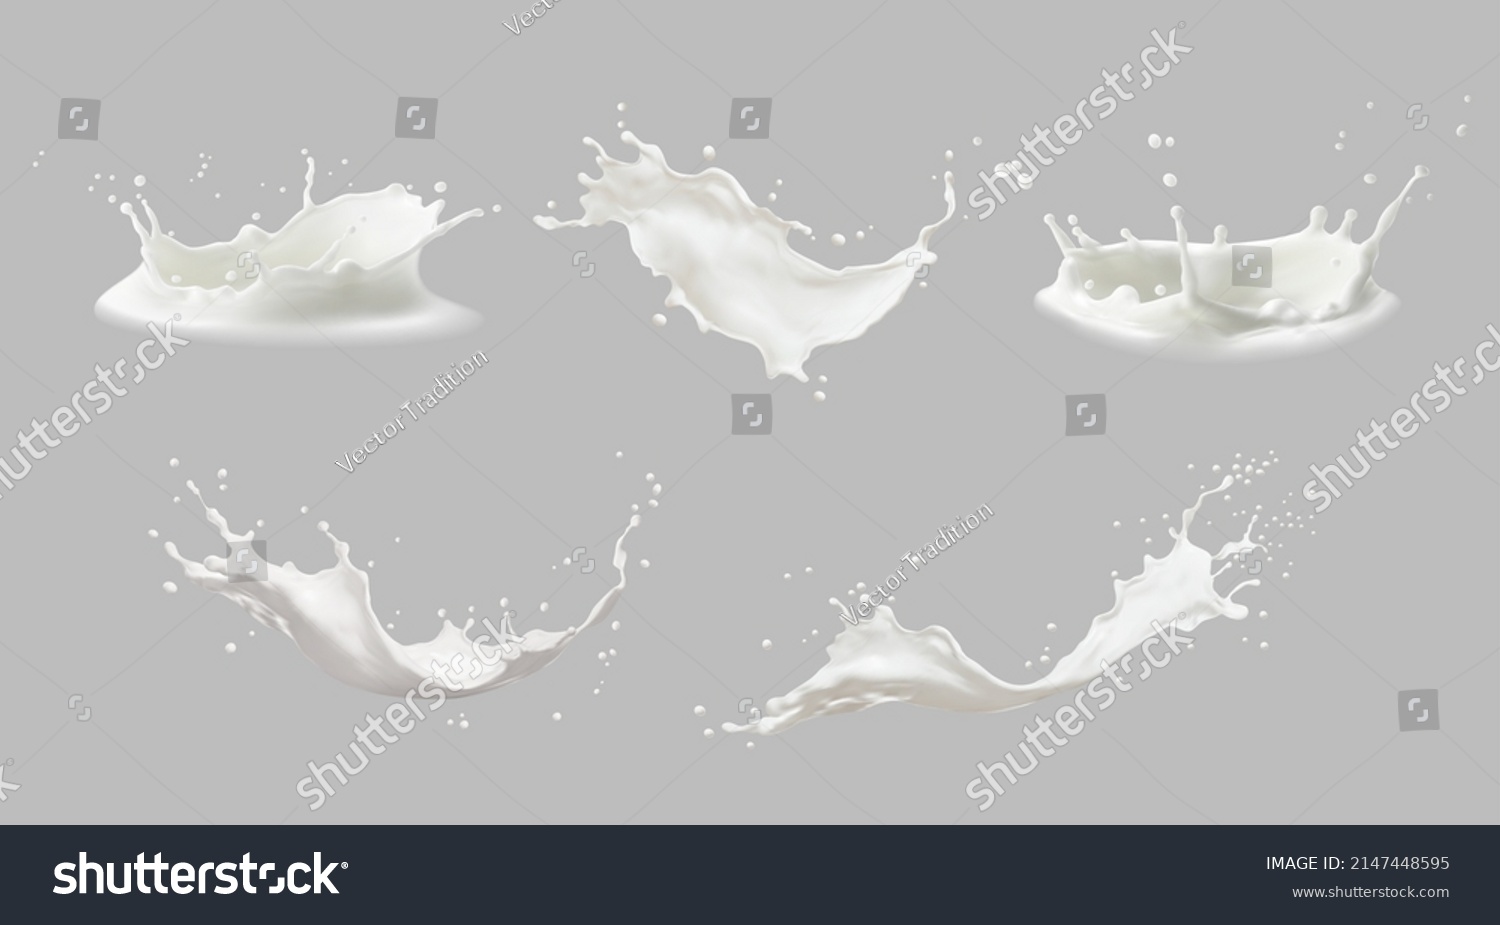 Realistic milk splashes or wave with drops and splatters. Liquid swirls and drips in shape of crown, liquid flow streams. Milky or dairy fresh product realistic 3d elements isolated set #2147448595